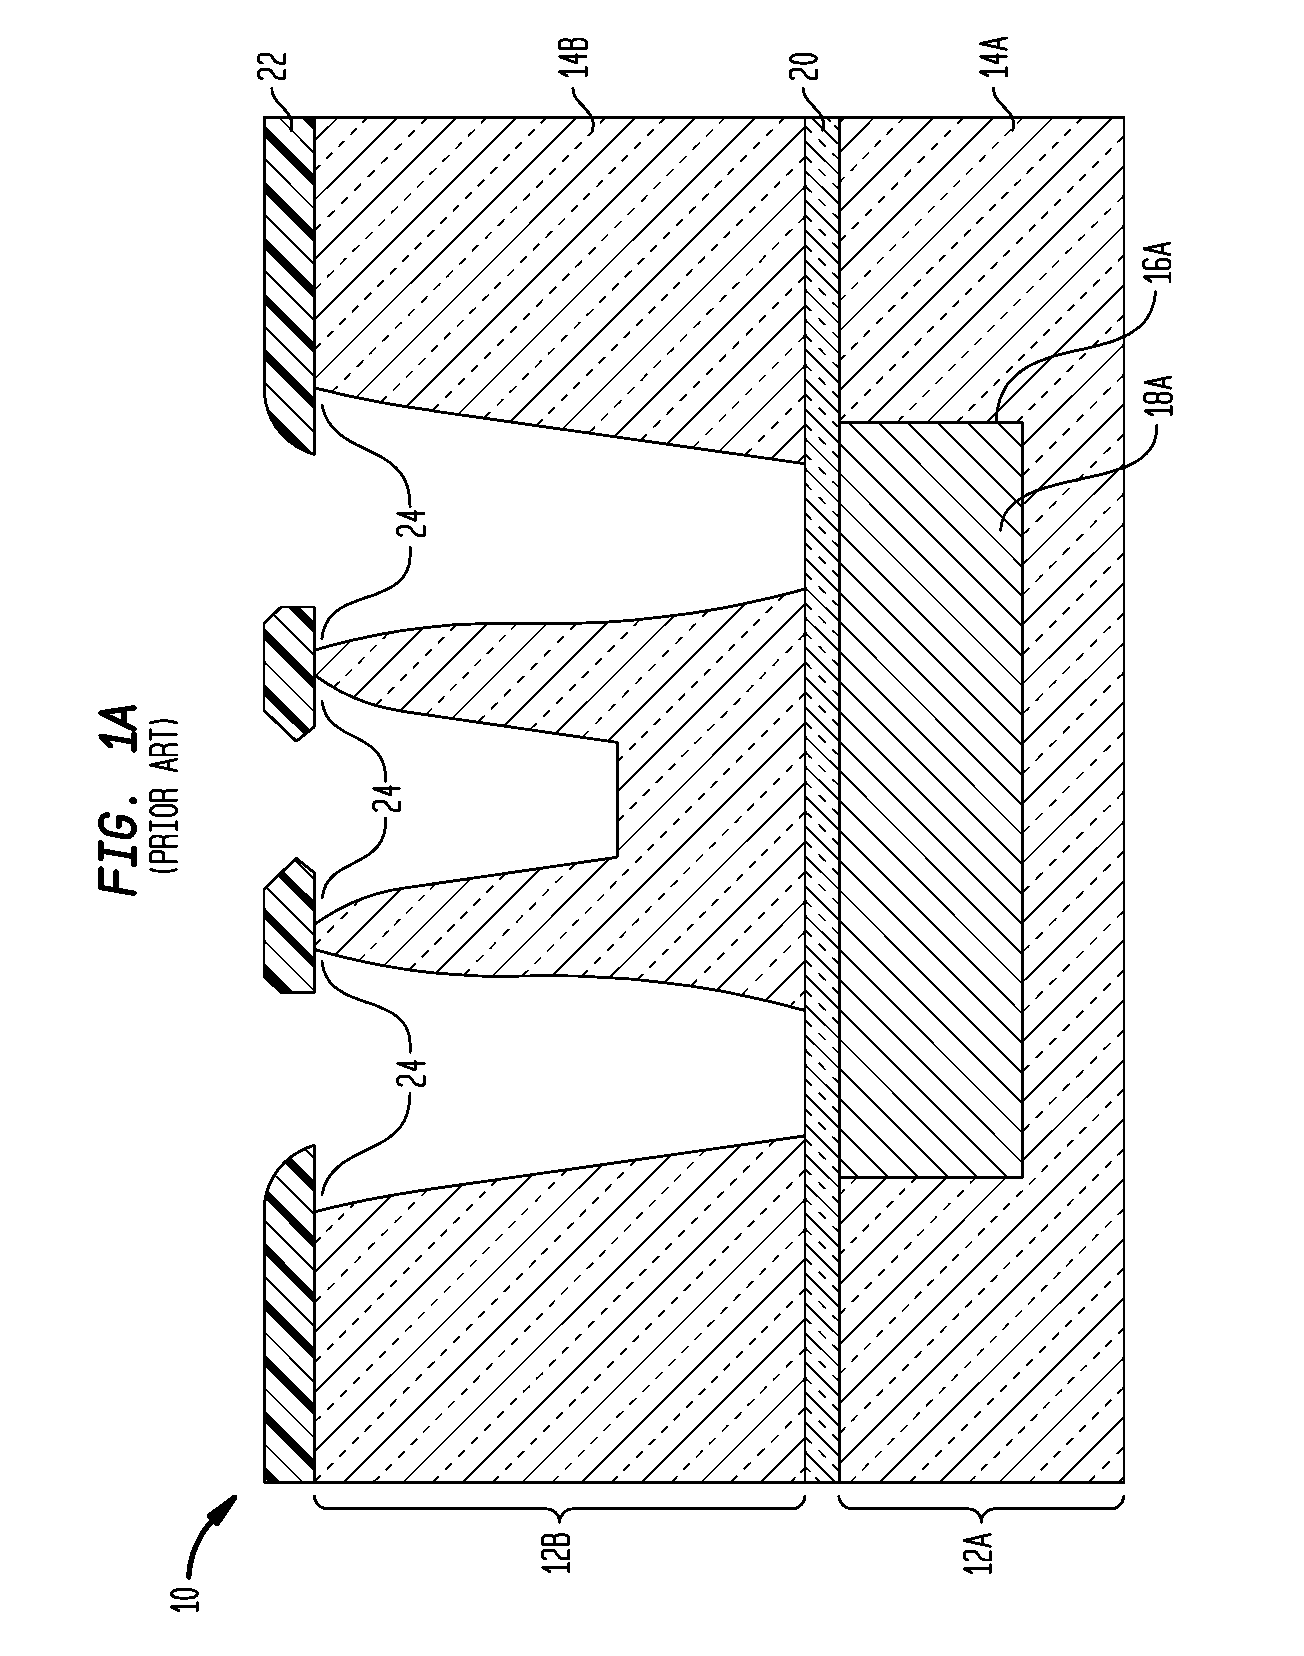 Hybrid interconnect structure for performance improvement and reliability enhancement